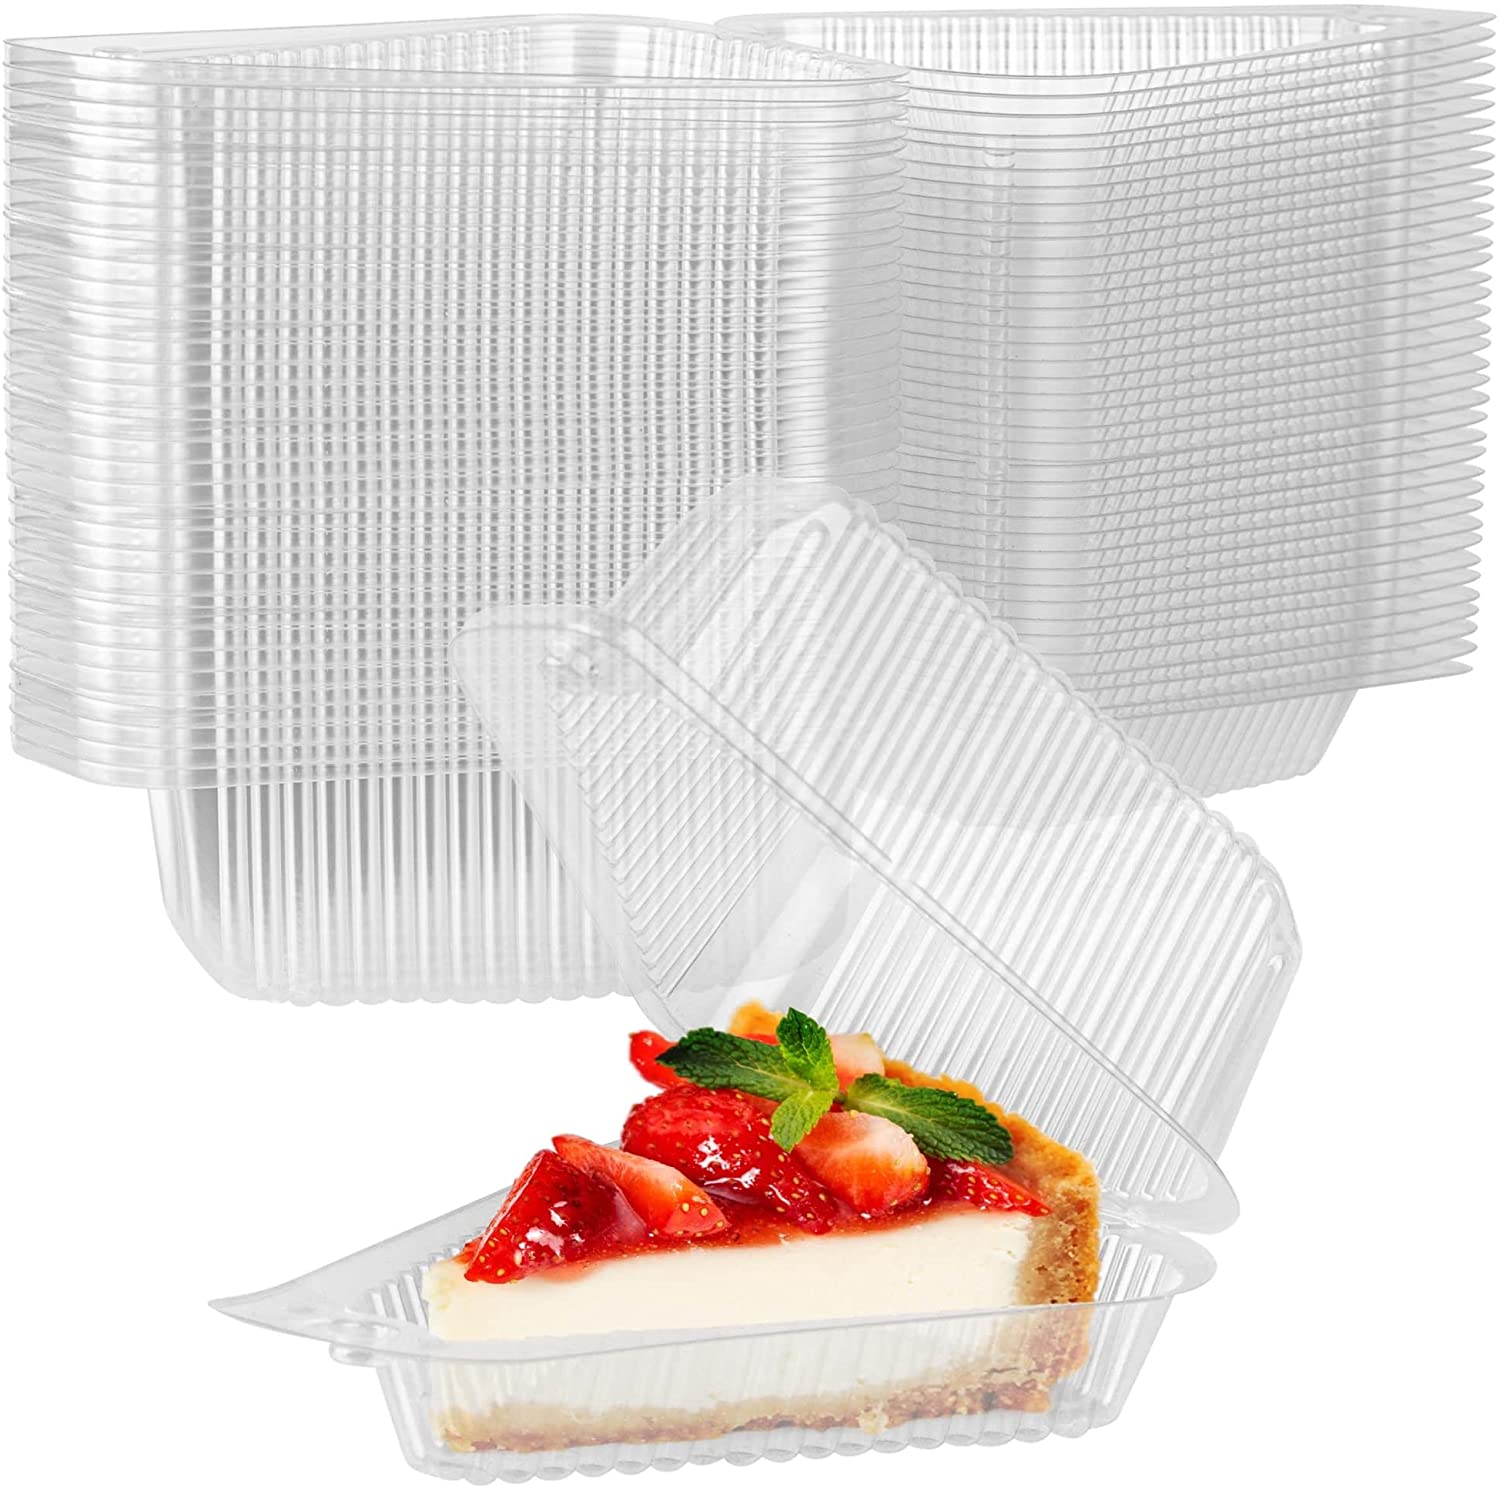 Cake Container, Hinged clear flan case, Bakery Container